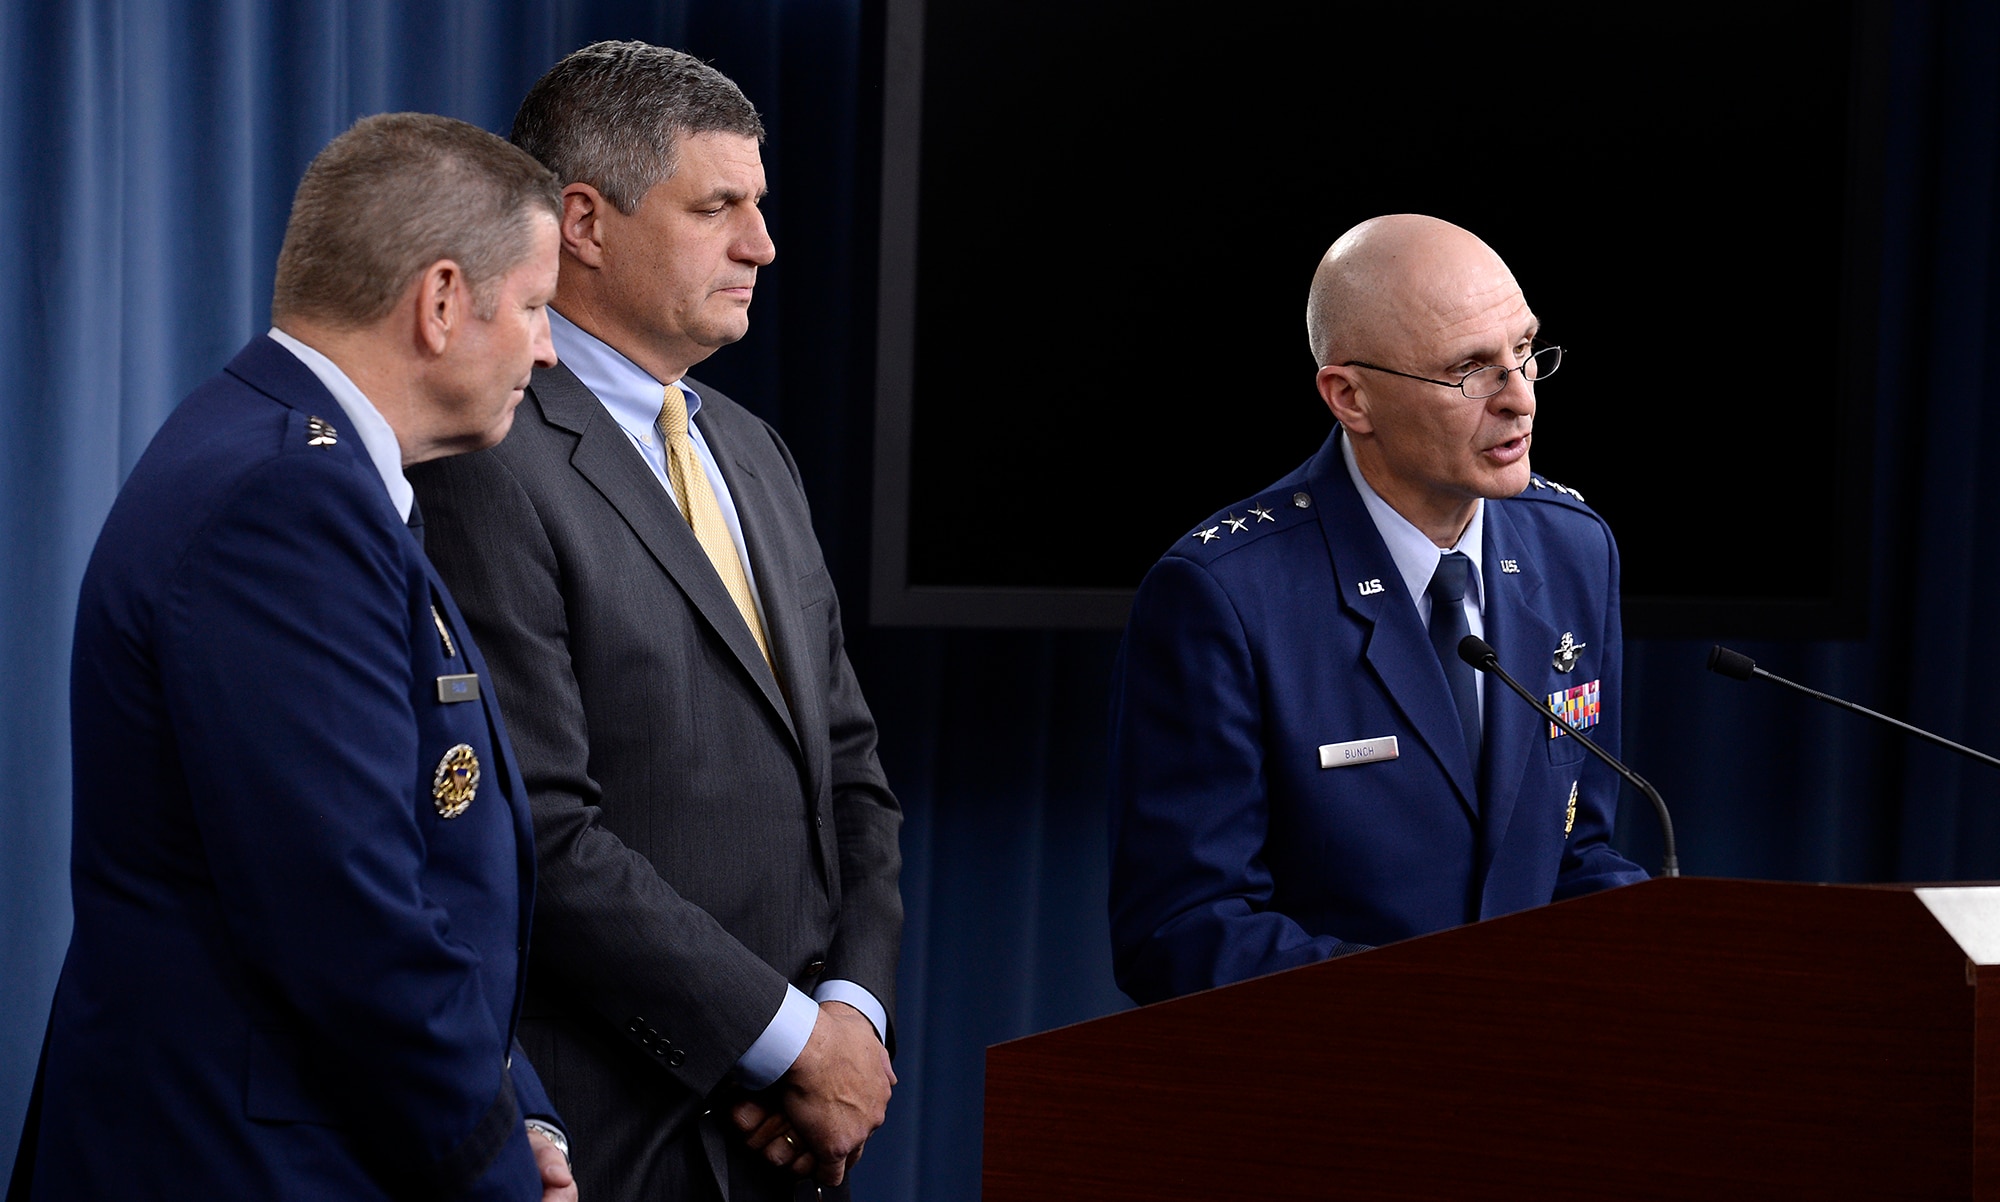 Lt. Gen. Arnold Bunch Jr., the military deputy for the Office of the Assistant Secretary of the Air Force for Acquisition, Dr. Bill LaPlante, the assistant secretary of the Air Force for acquisition, and Gen. Robin Rand, commander of Air Force Global Strike Command answer questions after Secretary of the Air Force Deborah Lee James and Air Force Chief of Staff Gen. Mark A. Welsh III announced the award of the long range strike bomber contract in the Pentagon during a press briefing, Oct. 27, 2015.  (U.S. Air Force photo/Scott M. Ash)